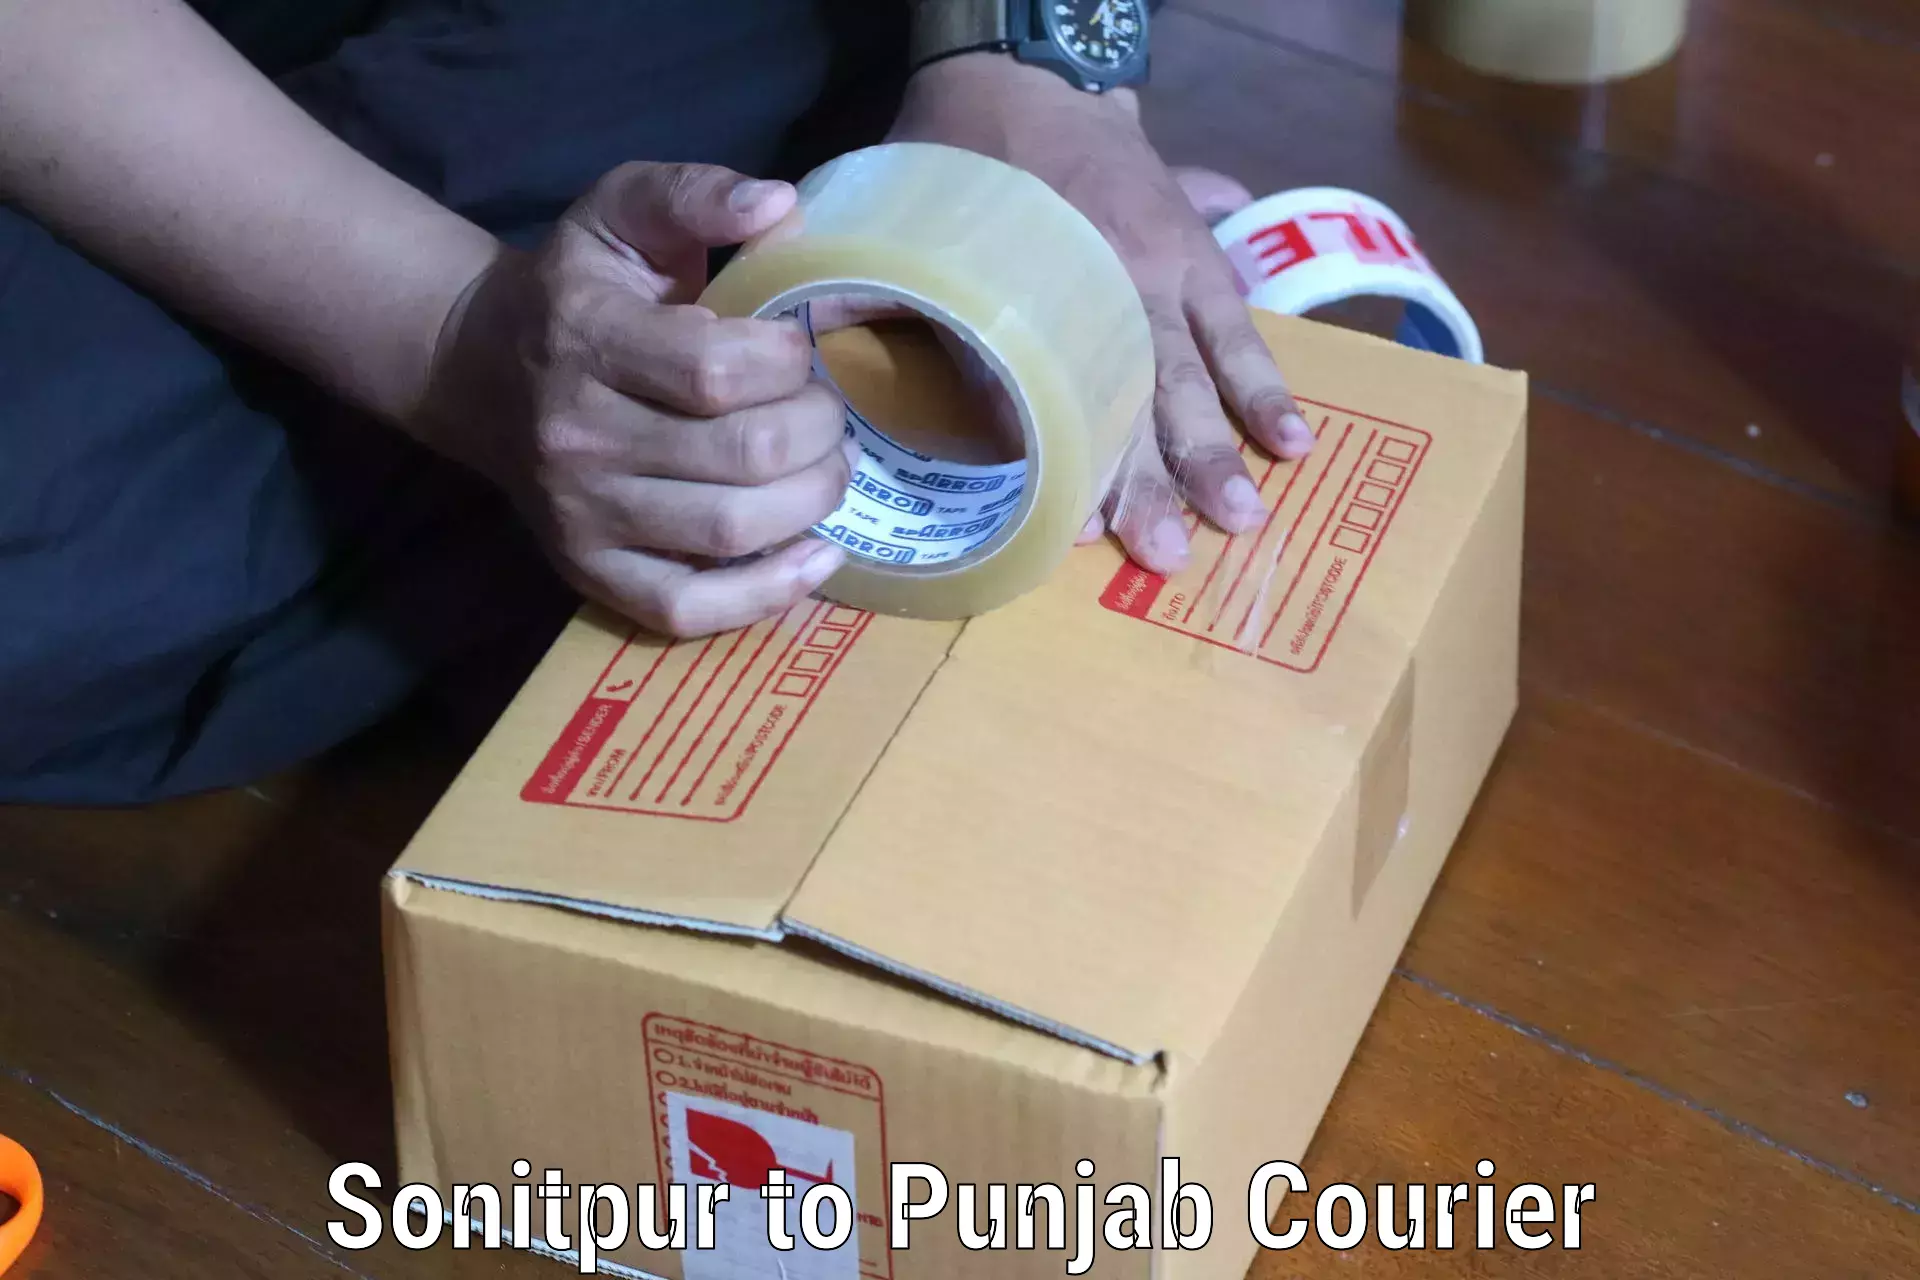 Pharmaceutical courier Sonitpur to Punjab